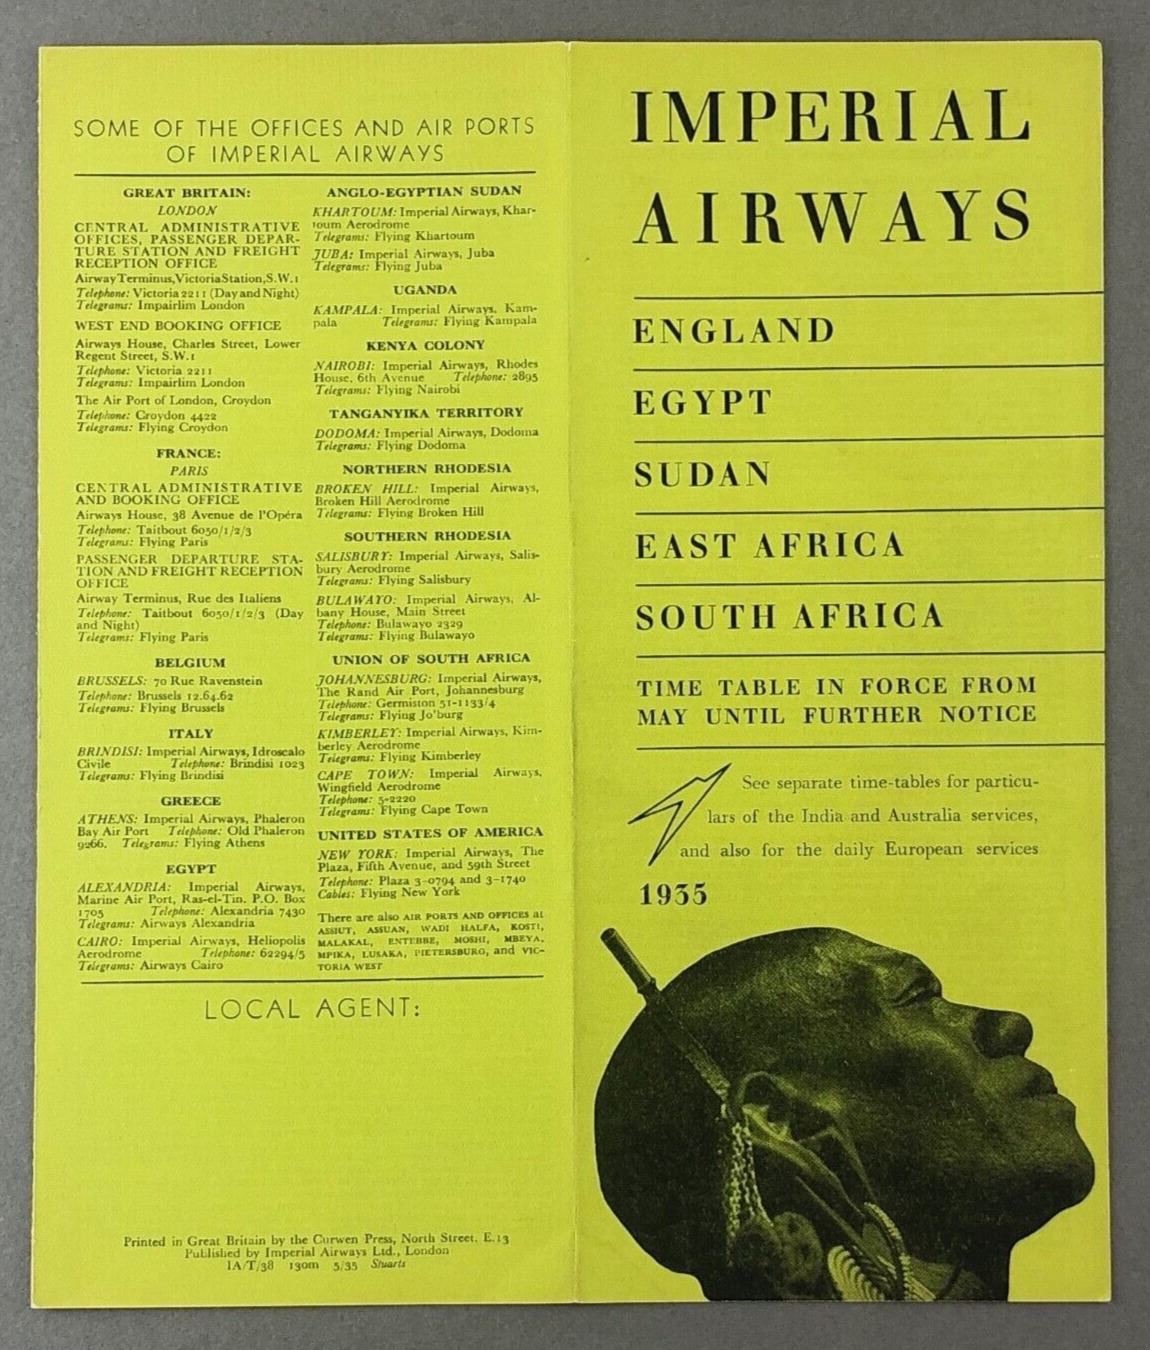 IMPERIAL AIRWAYS MAY 1935 AIRLINE TIMETABLE EGYPT SUDAN EAST SOUTH AFRICA ROUTE 